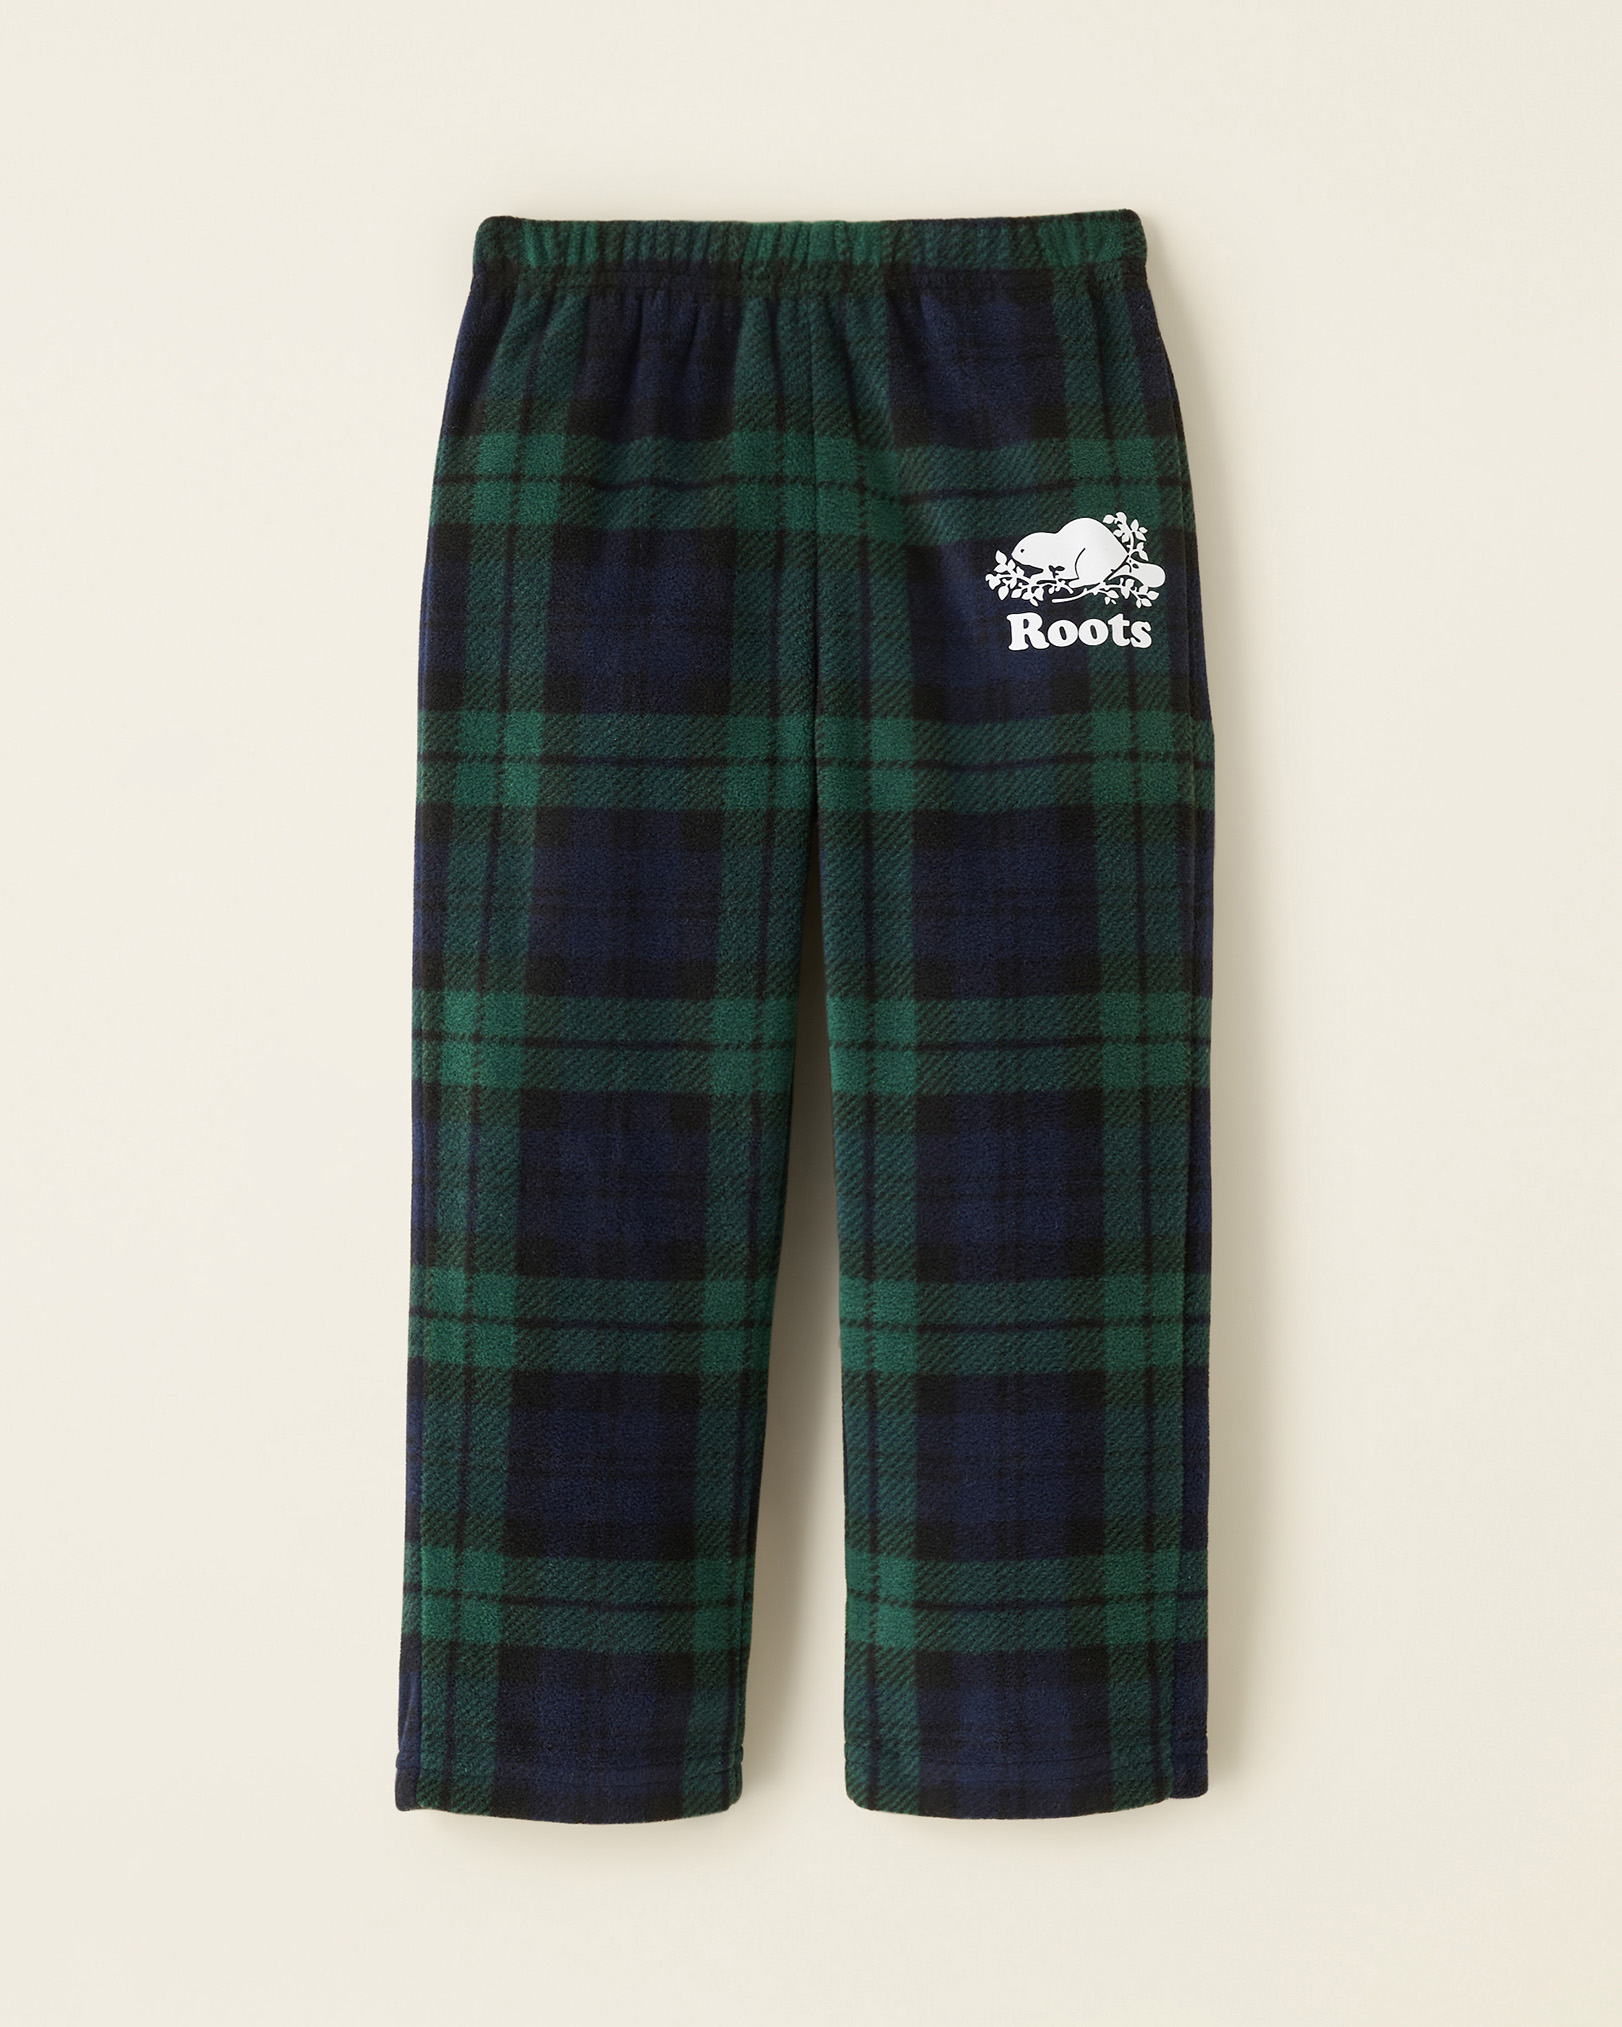 Roots Toddler Plaid Pajama Pant in Assorted